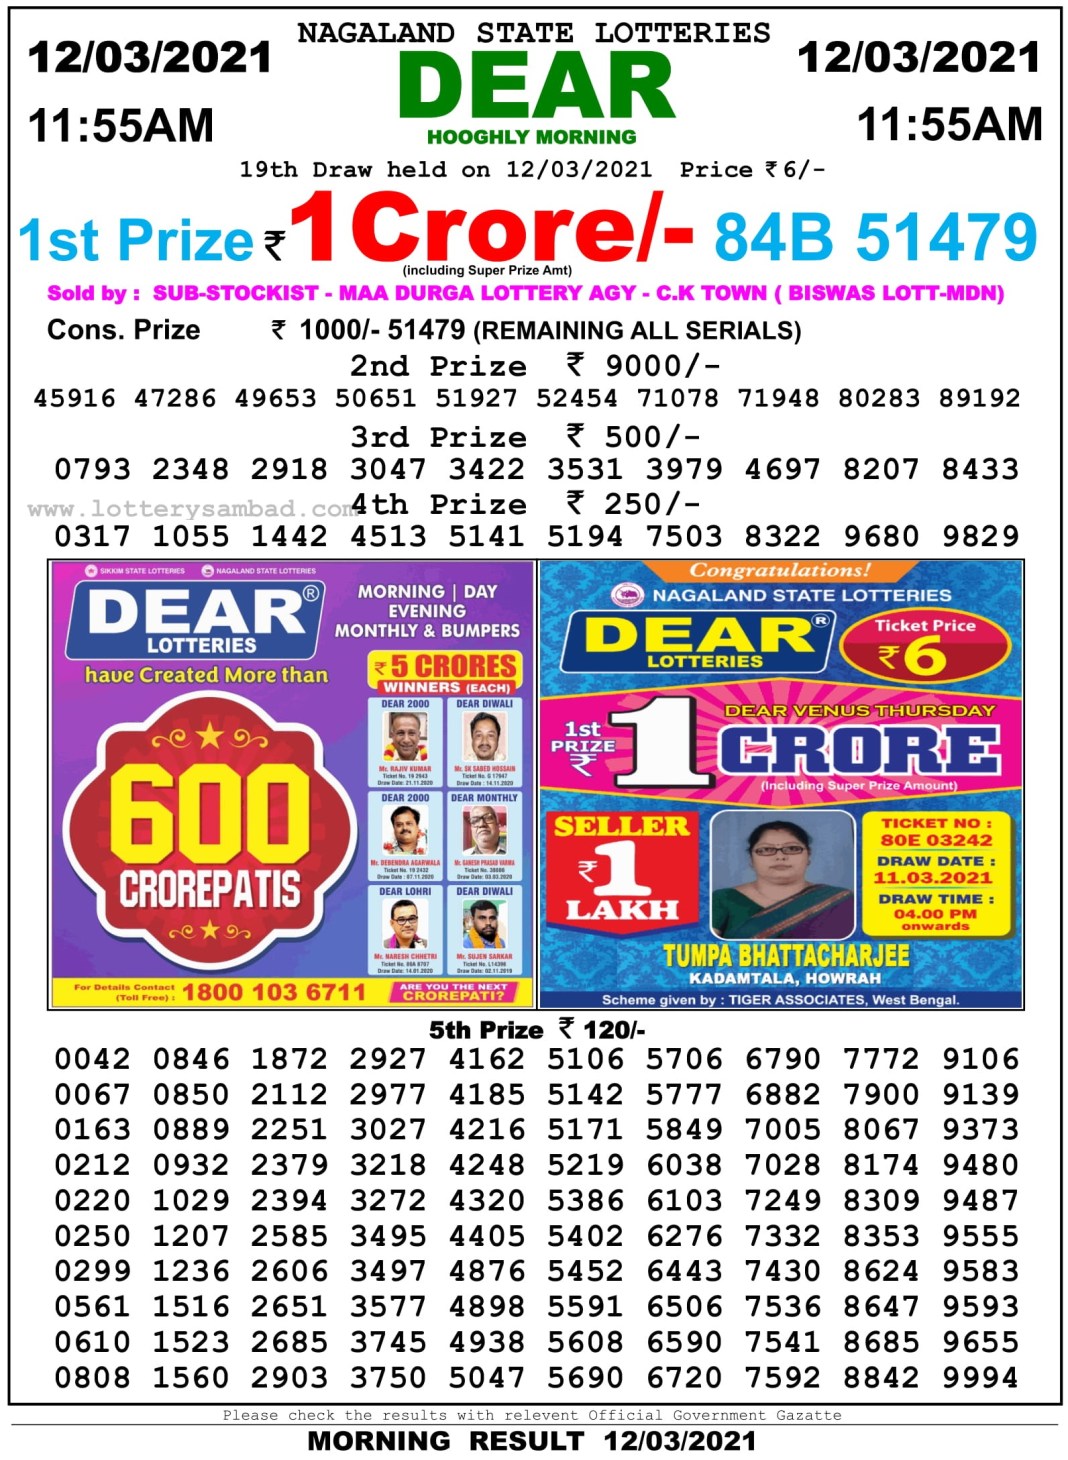 DEAR DAILY 1155AM LOTTERY RESULT 12.03.2021